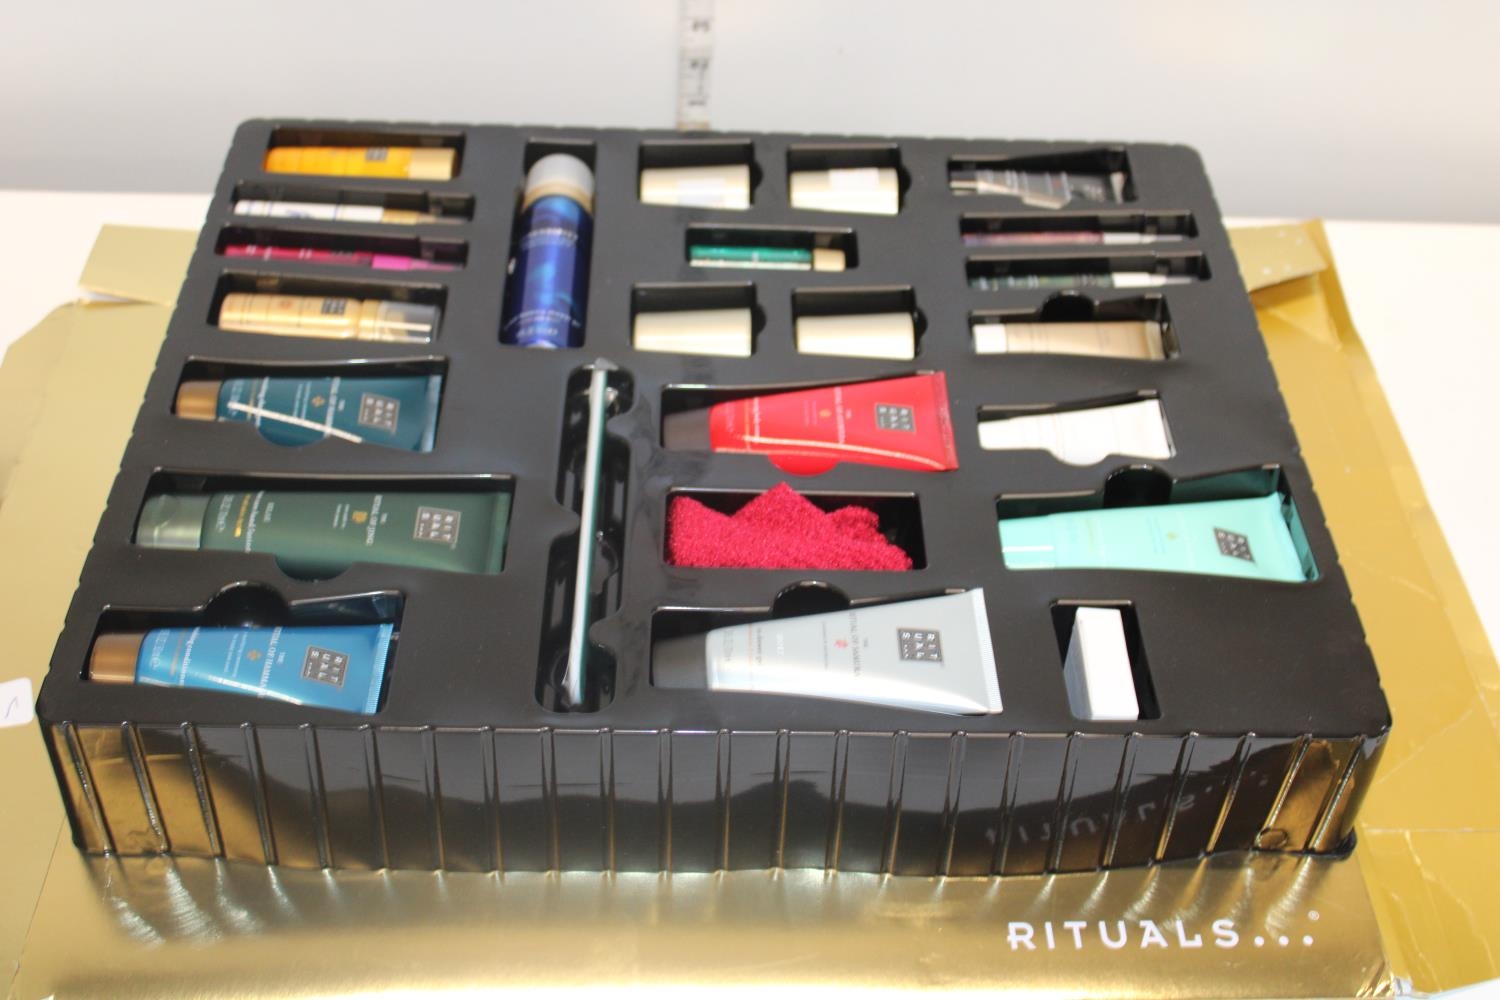 A box set of Rituals beauty products